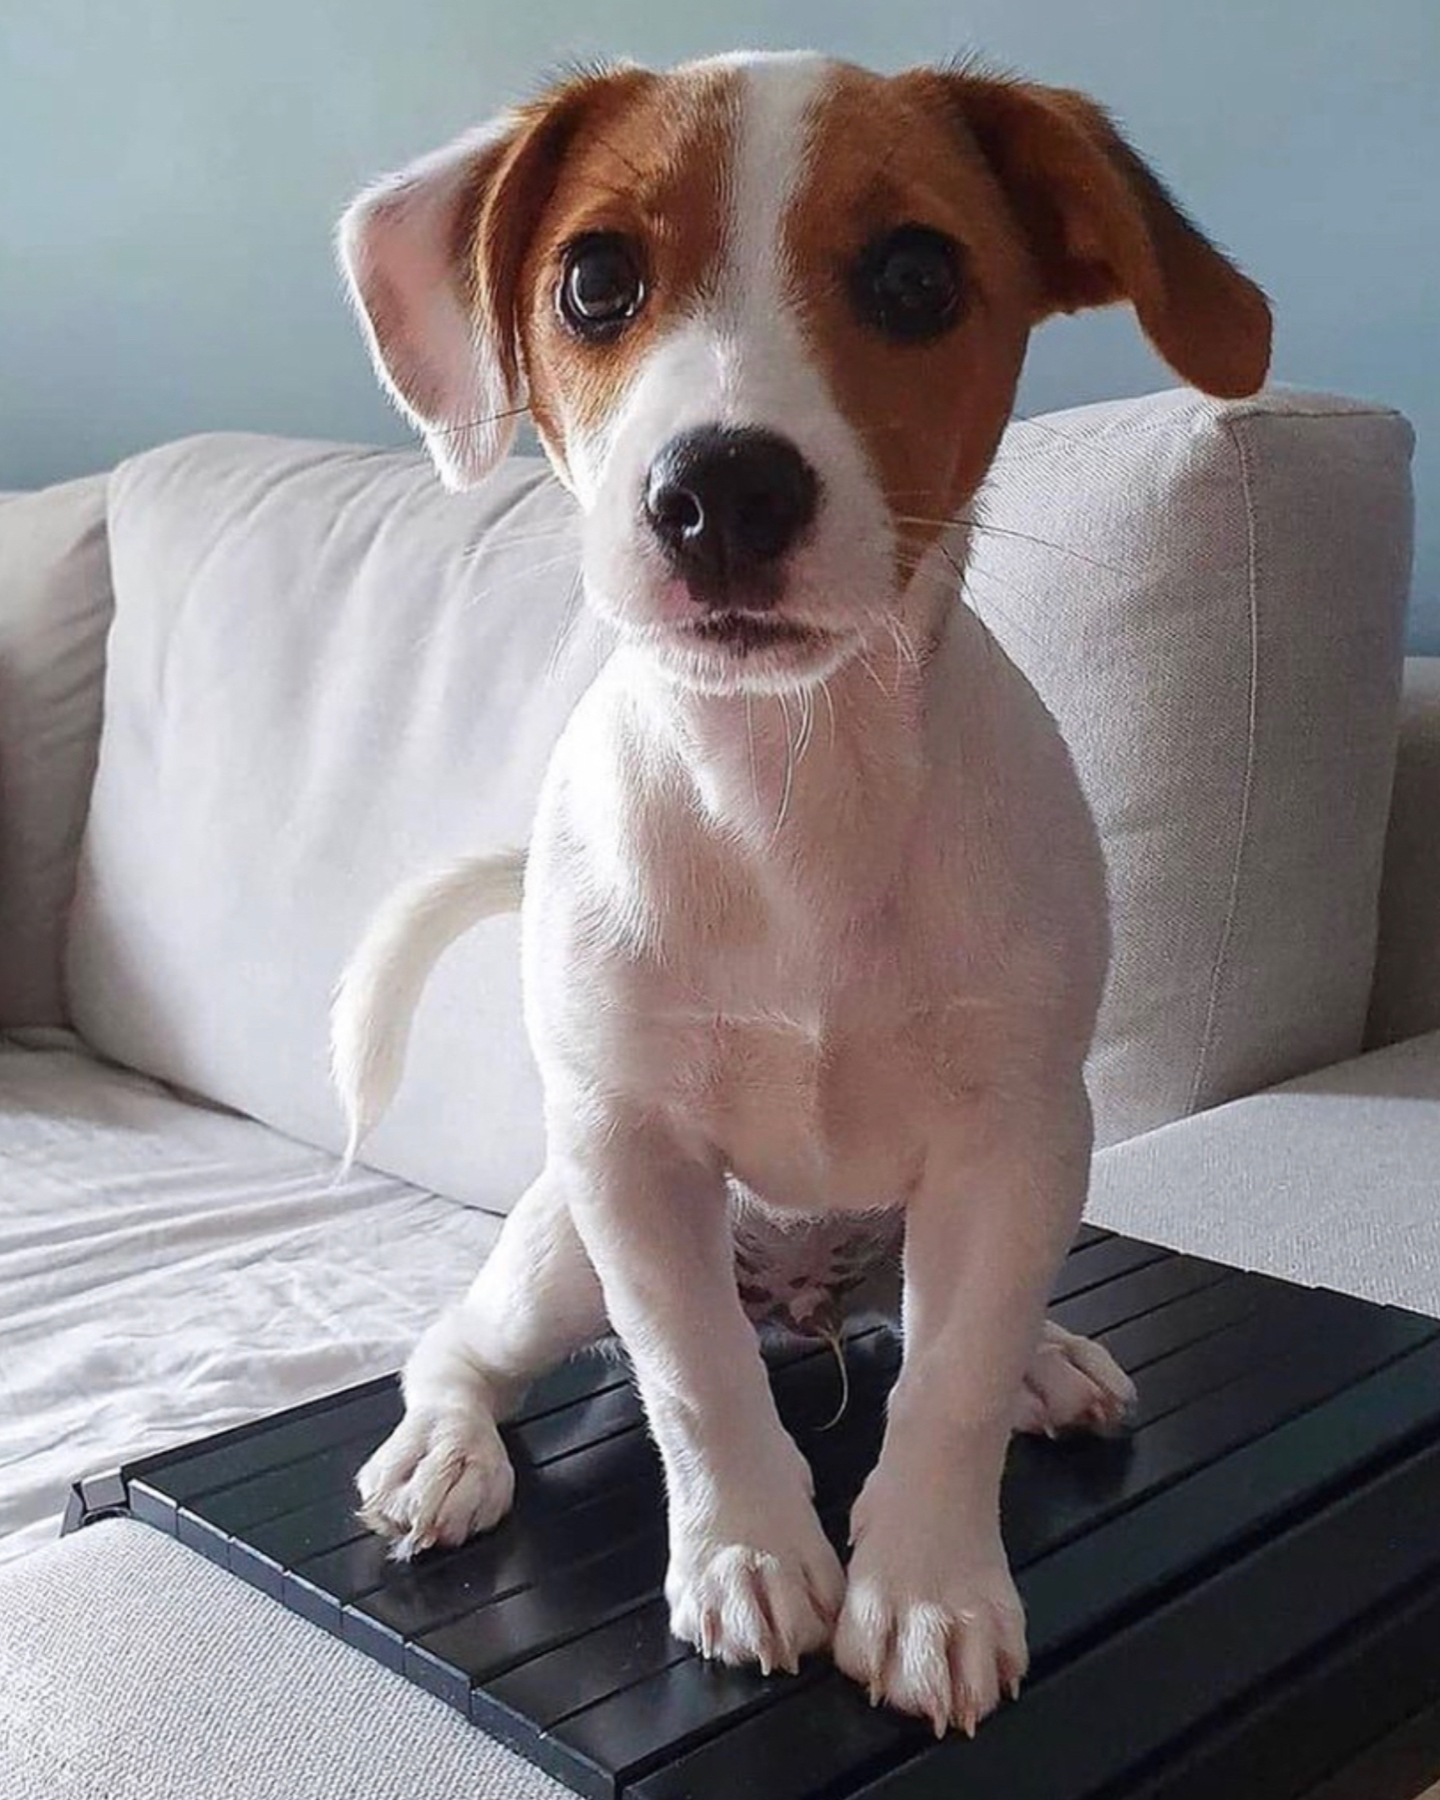 An adorable Jack Russell Terrier puppy just chilling on the couch